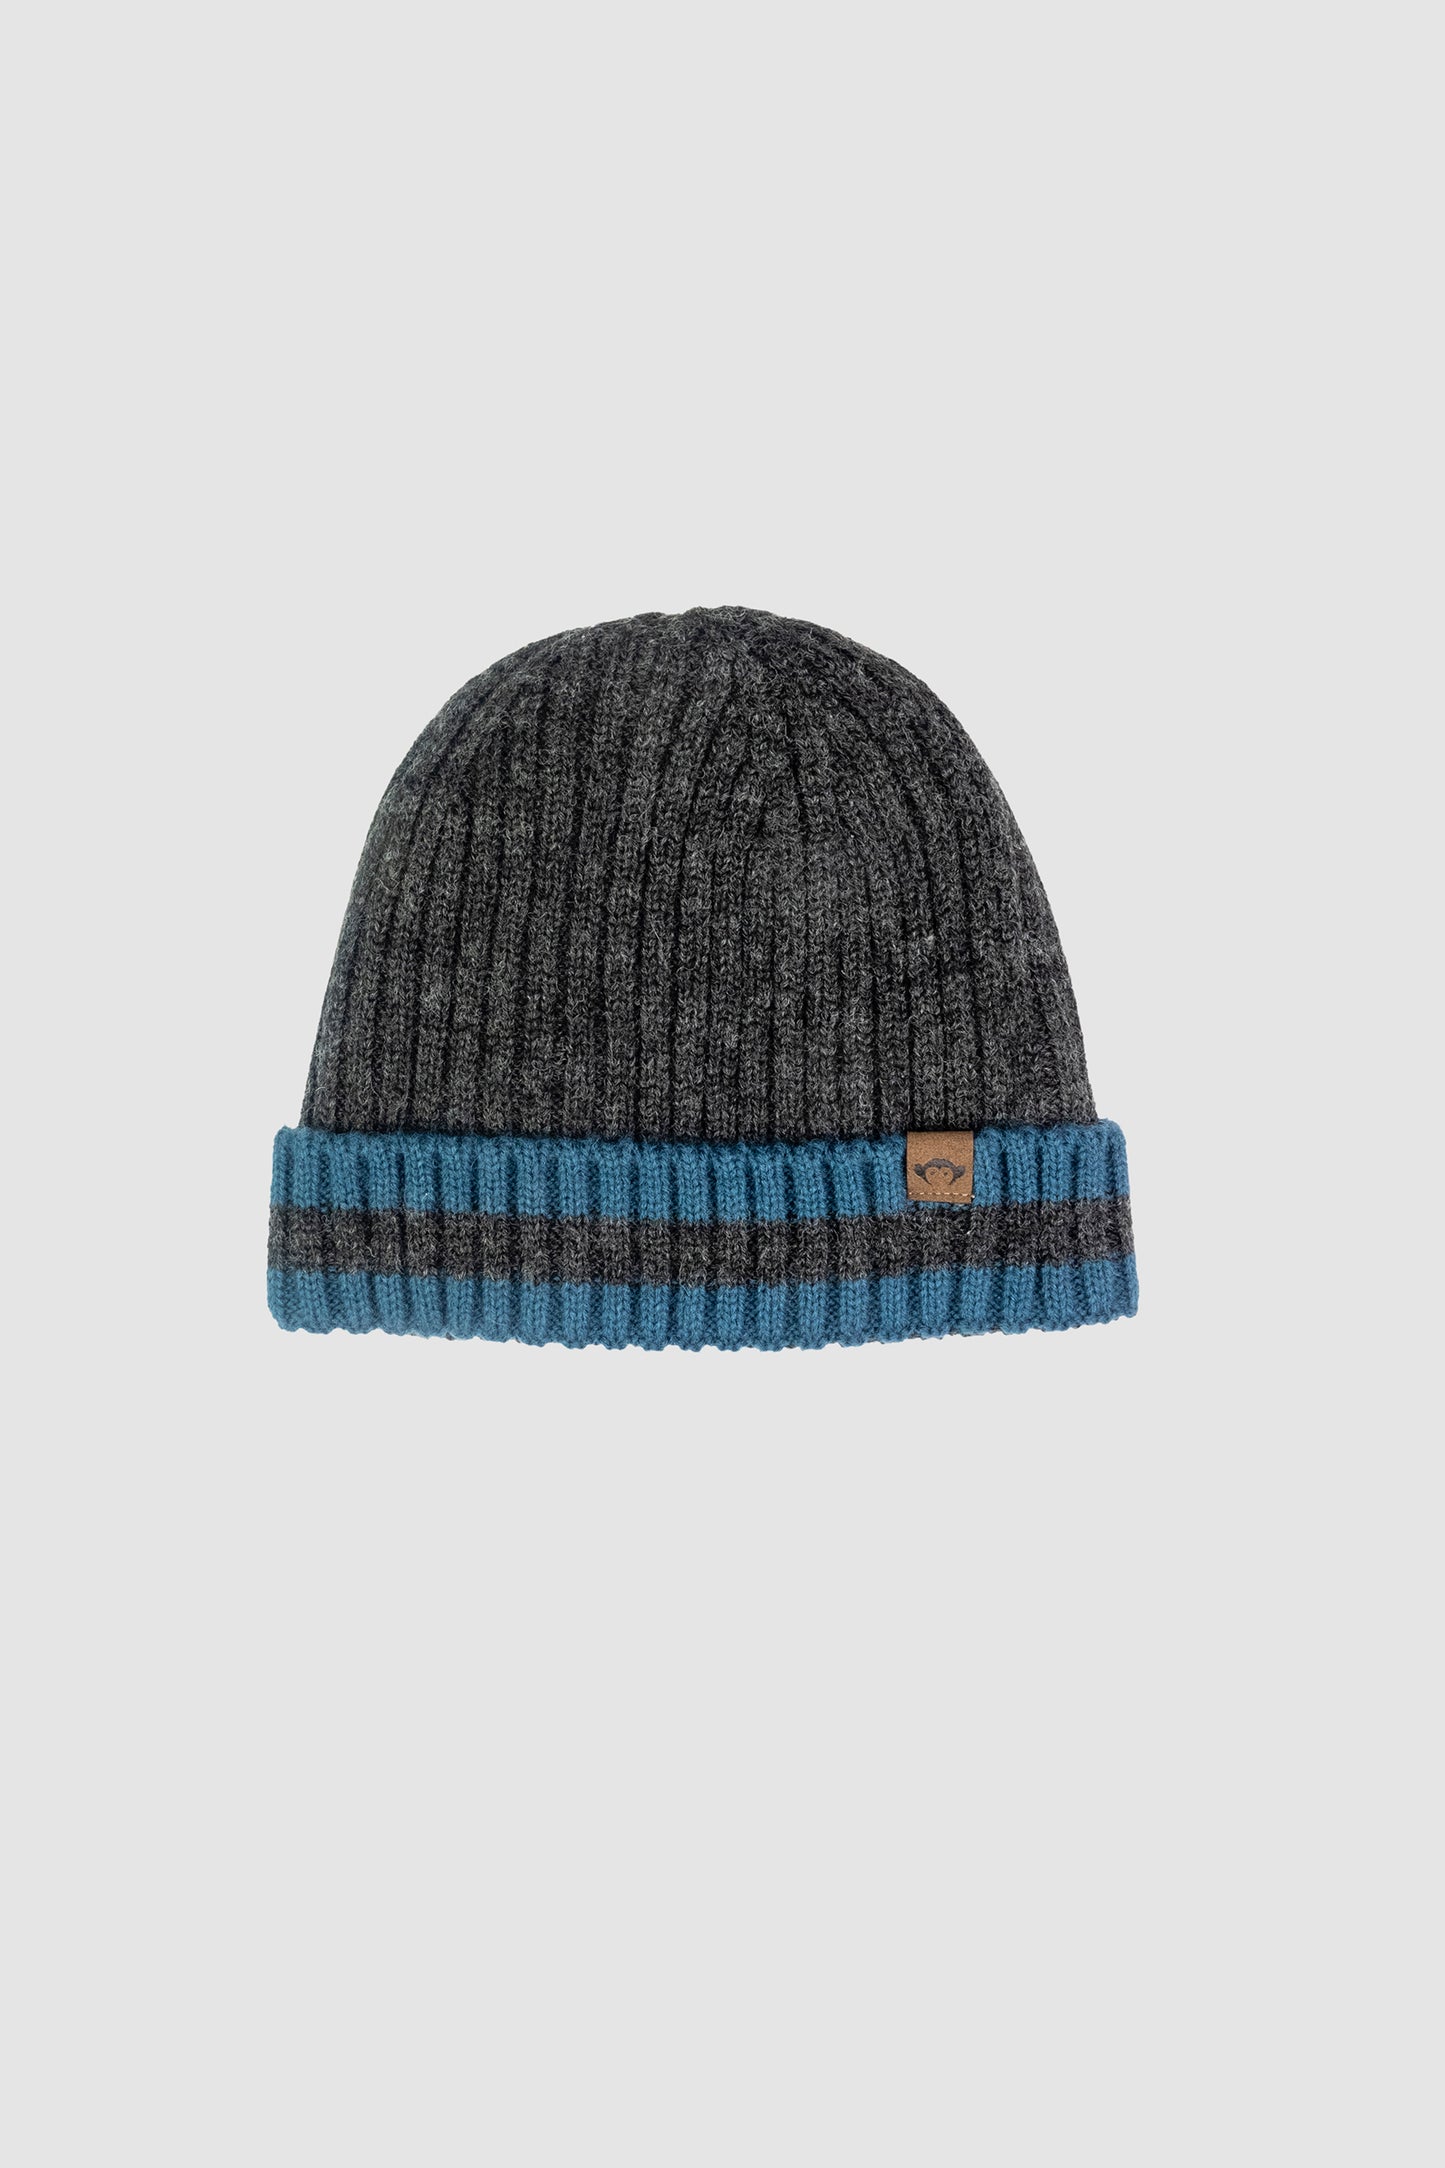 Appaman knit ribbed beanie in grey and blue